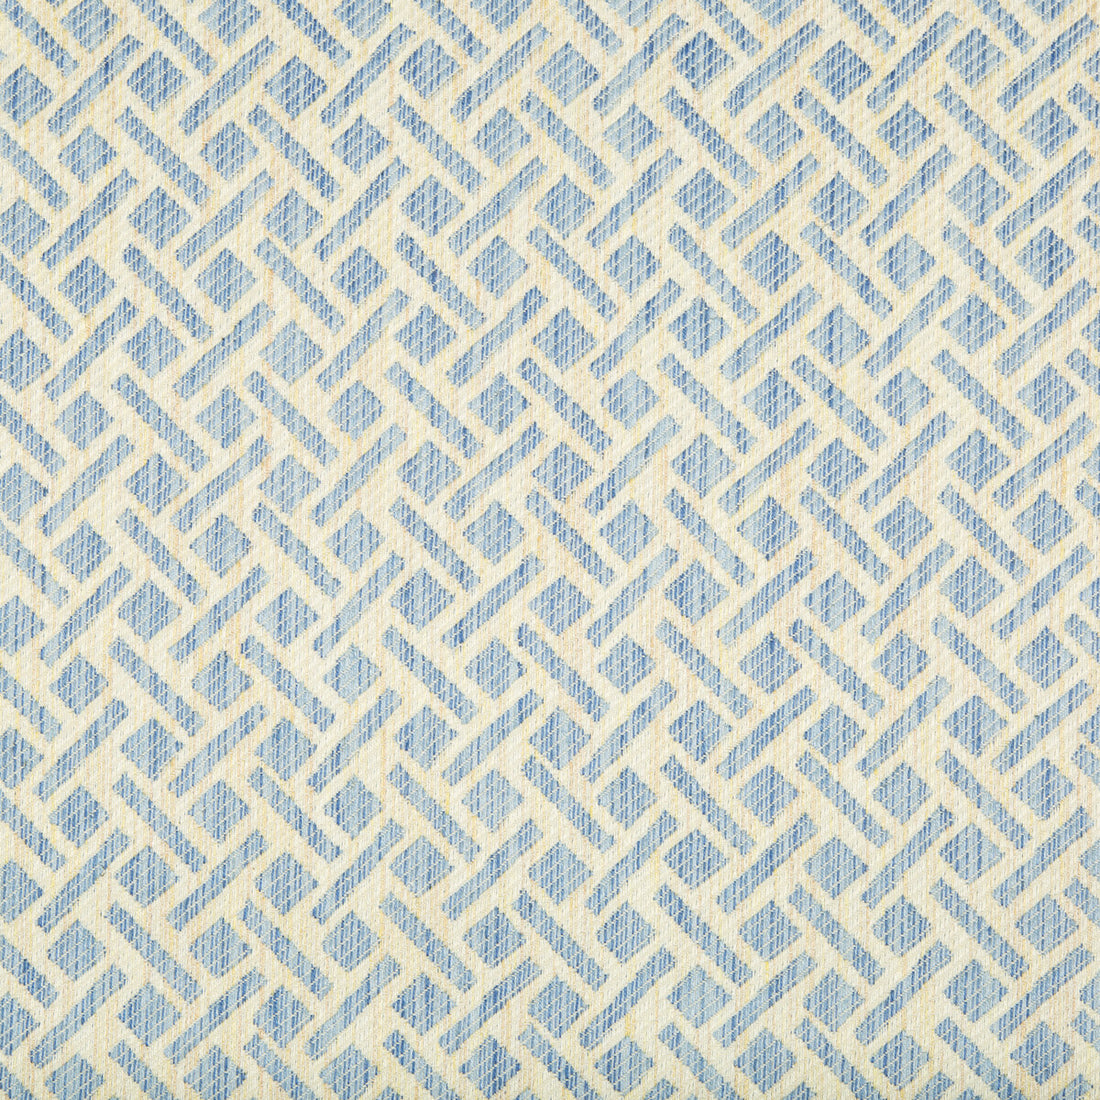 Comte Strie fabric in canton color - pattern 8017141.5.0 - by Brunschwig &amp; Fils in the Baronet collection